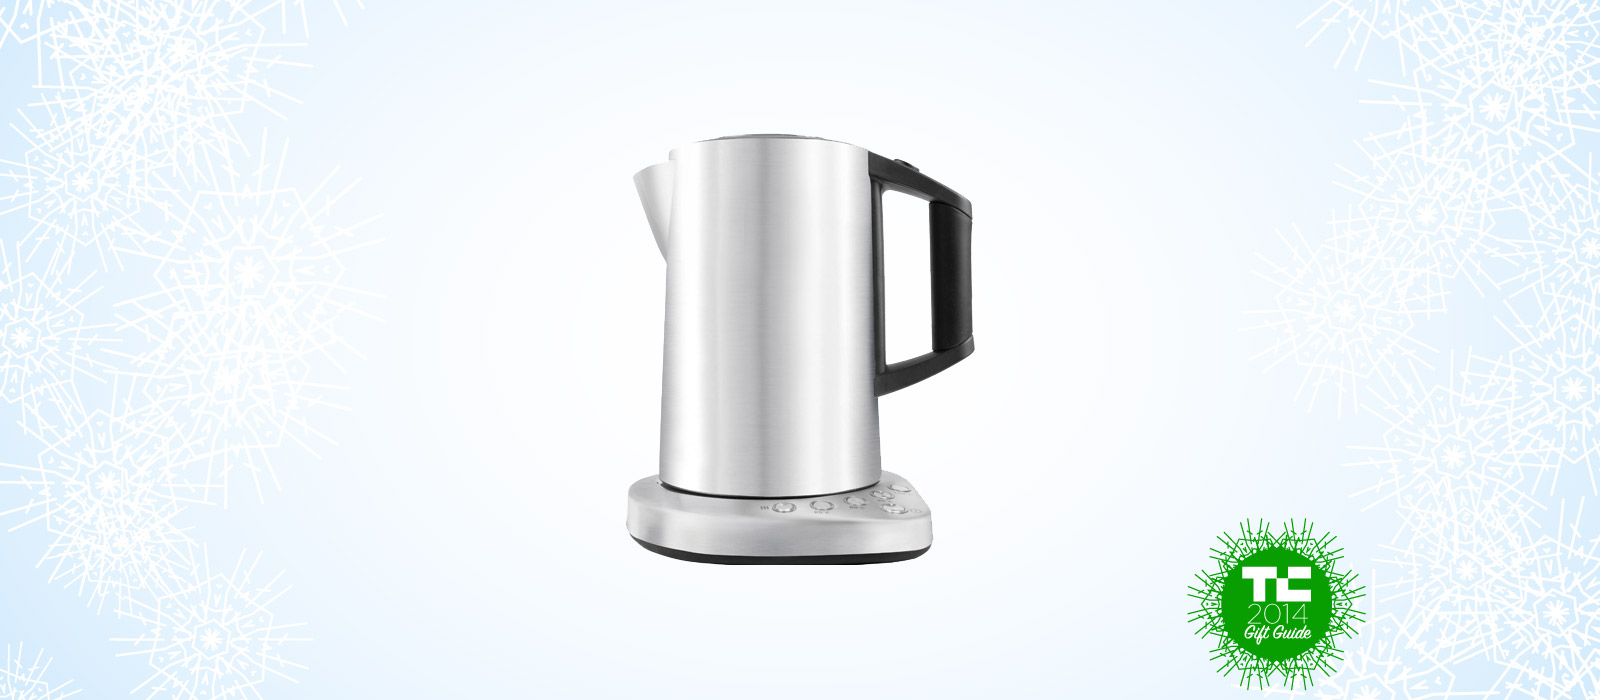 kettle-giftguide14